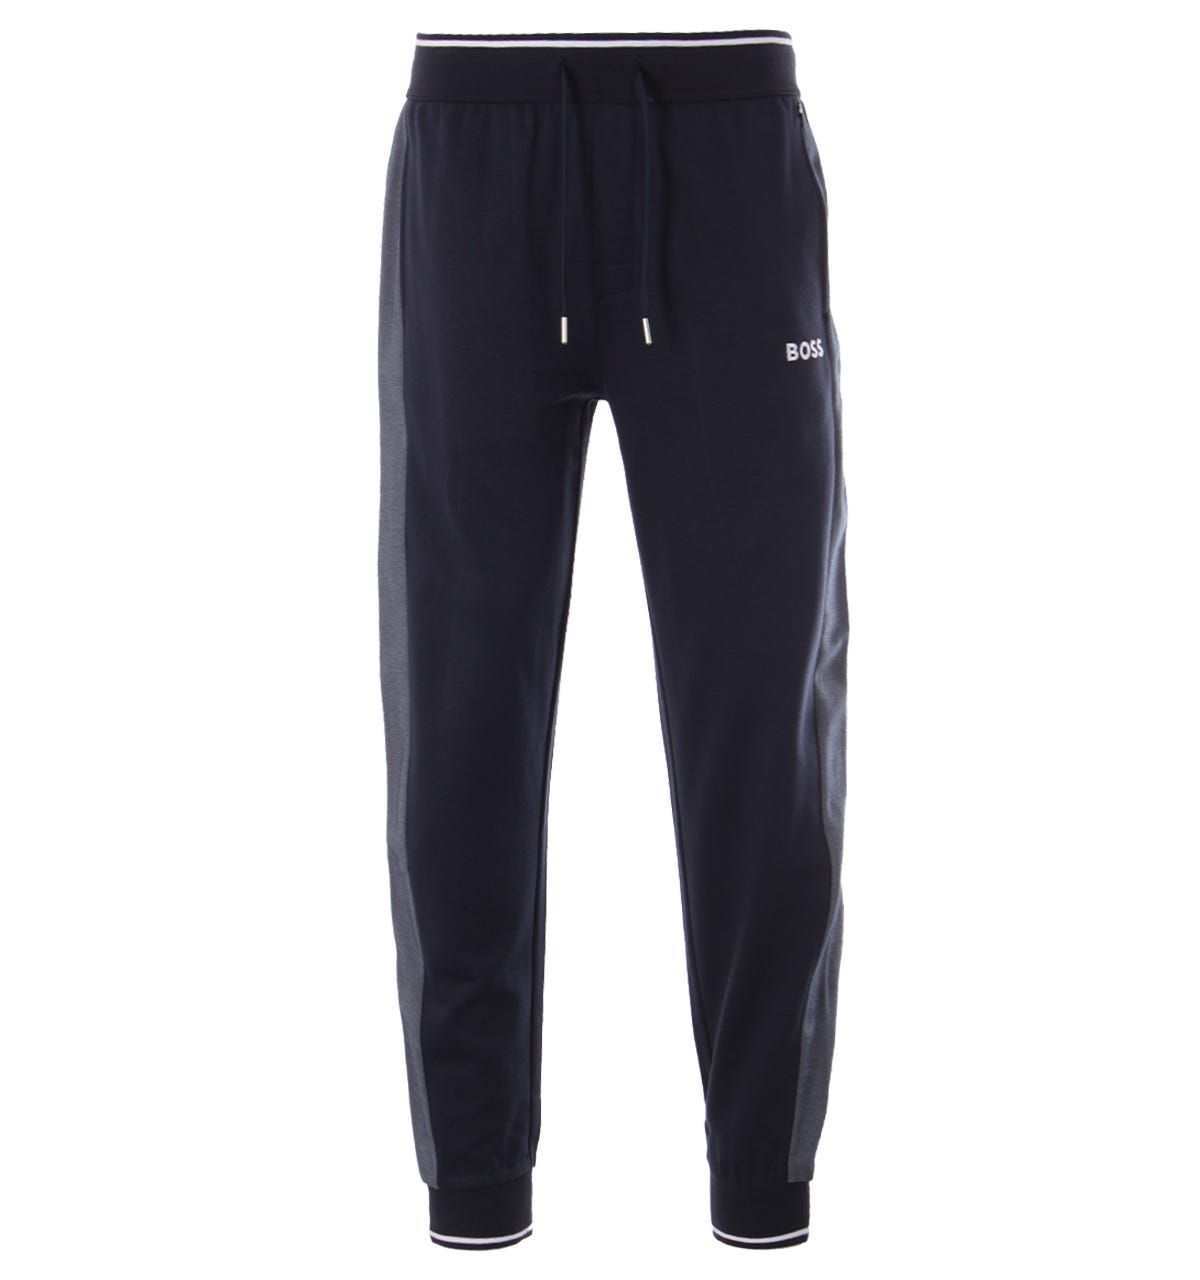 These modern tracksuit joggers from BOSS are perfect for creating a loungewear look. Crafted from a cotton blend piqué, providing comfort and breathability. Featuring an elasticated drawstring waist, side seam pockets and contrast inserts at the side seams for a sporty look. Finished with the iconic BOSS logo embroidered at the left thigh.Regular Fit, Cotton Blend Pique, Elasticated Drawstring Waist, Twin Side Seam Pockets, Fitted Cuffs, Contrast Inserts, BOSS Branding. Style & Fit:Regular Fit, Fits True to Size. Composition & Care:70% Cotton, 30% Polyester, Machine Wash.